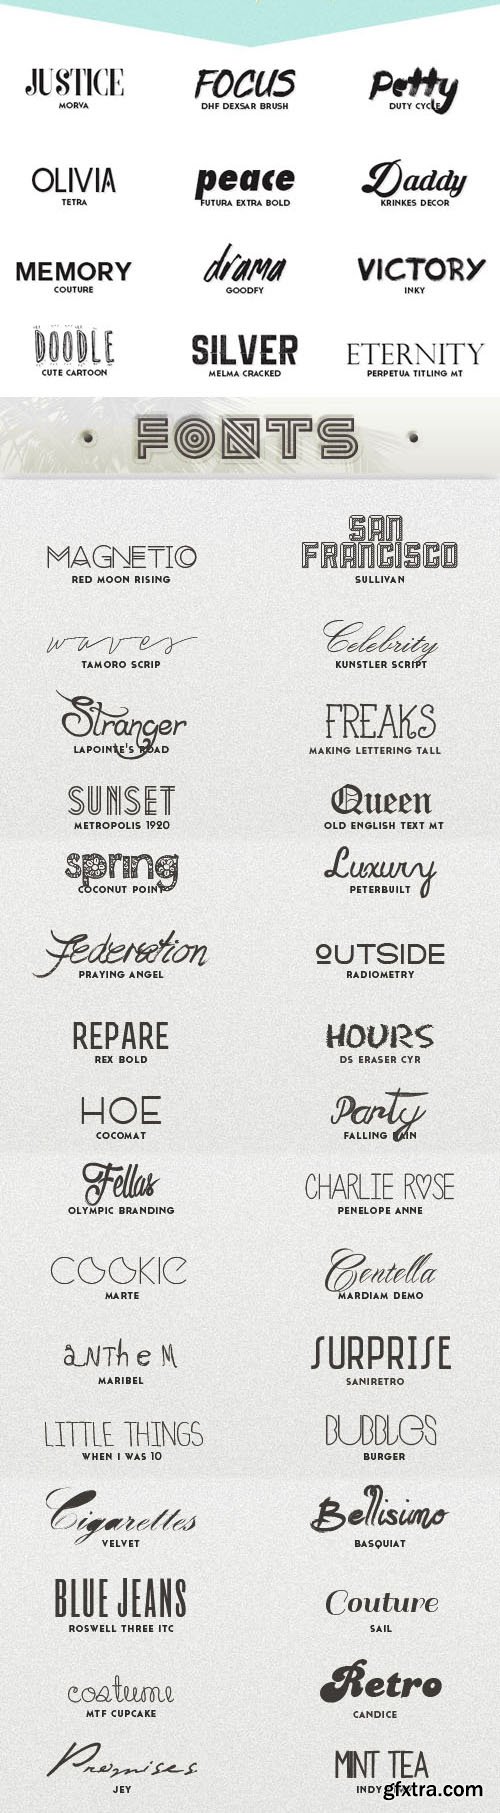 50+ New Fonts Pack